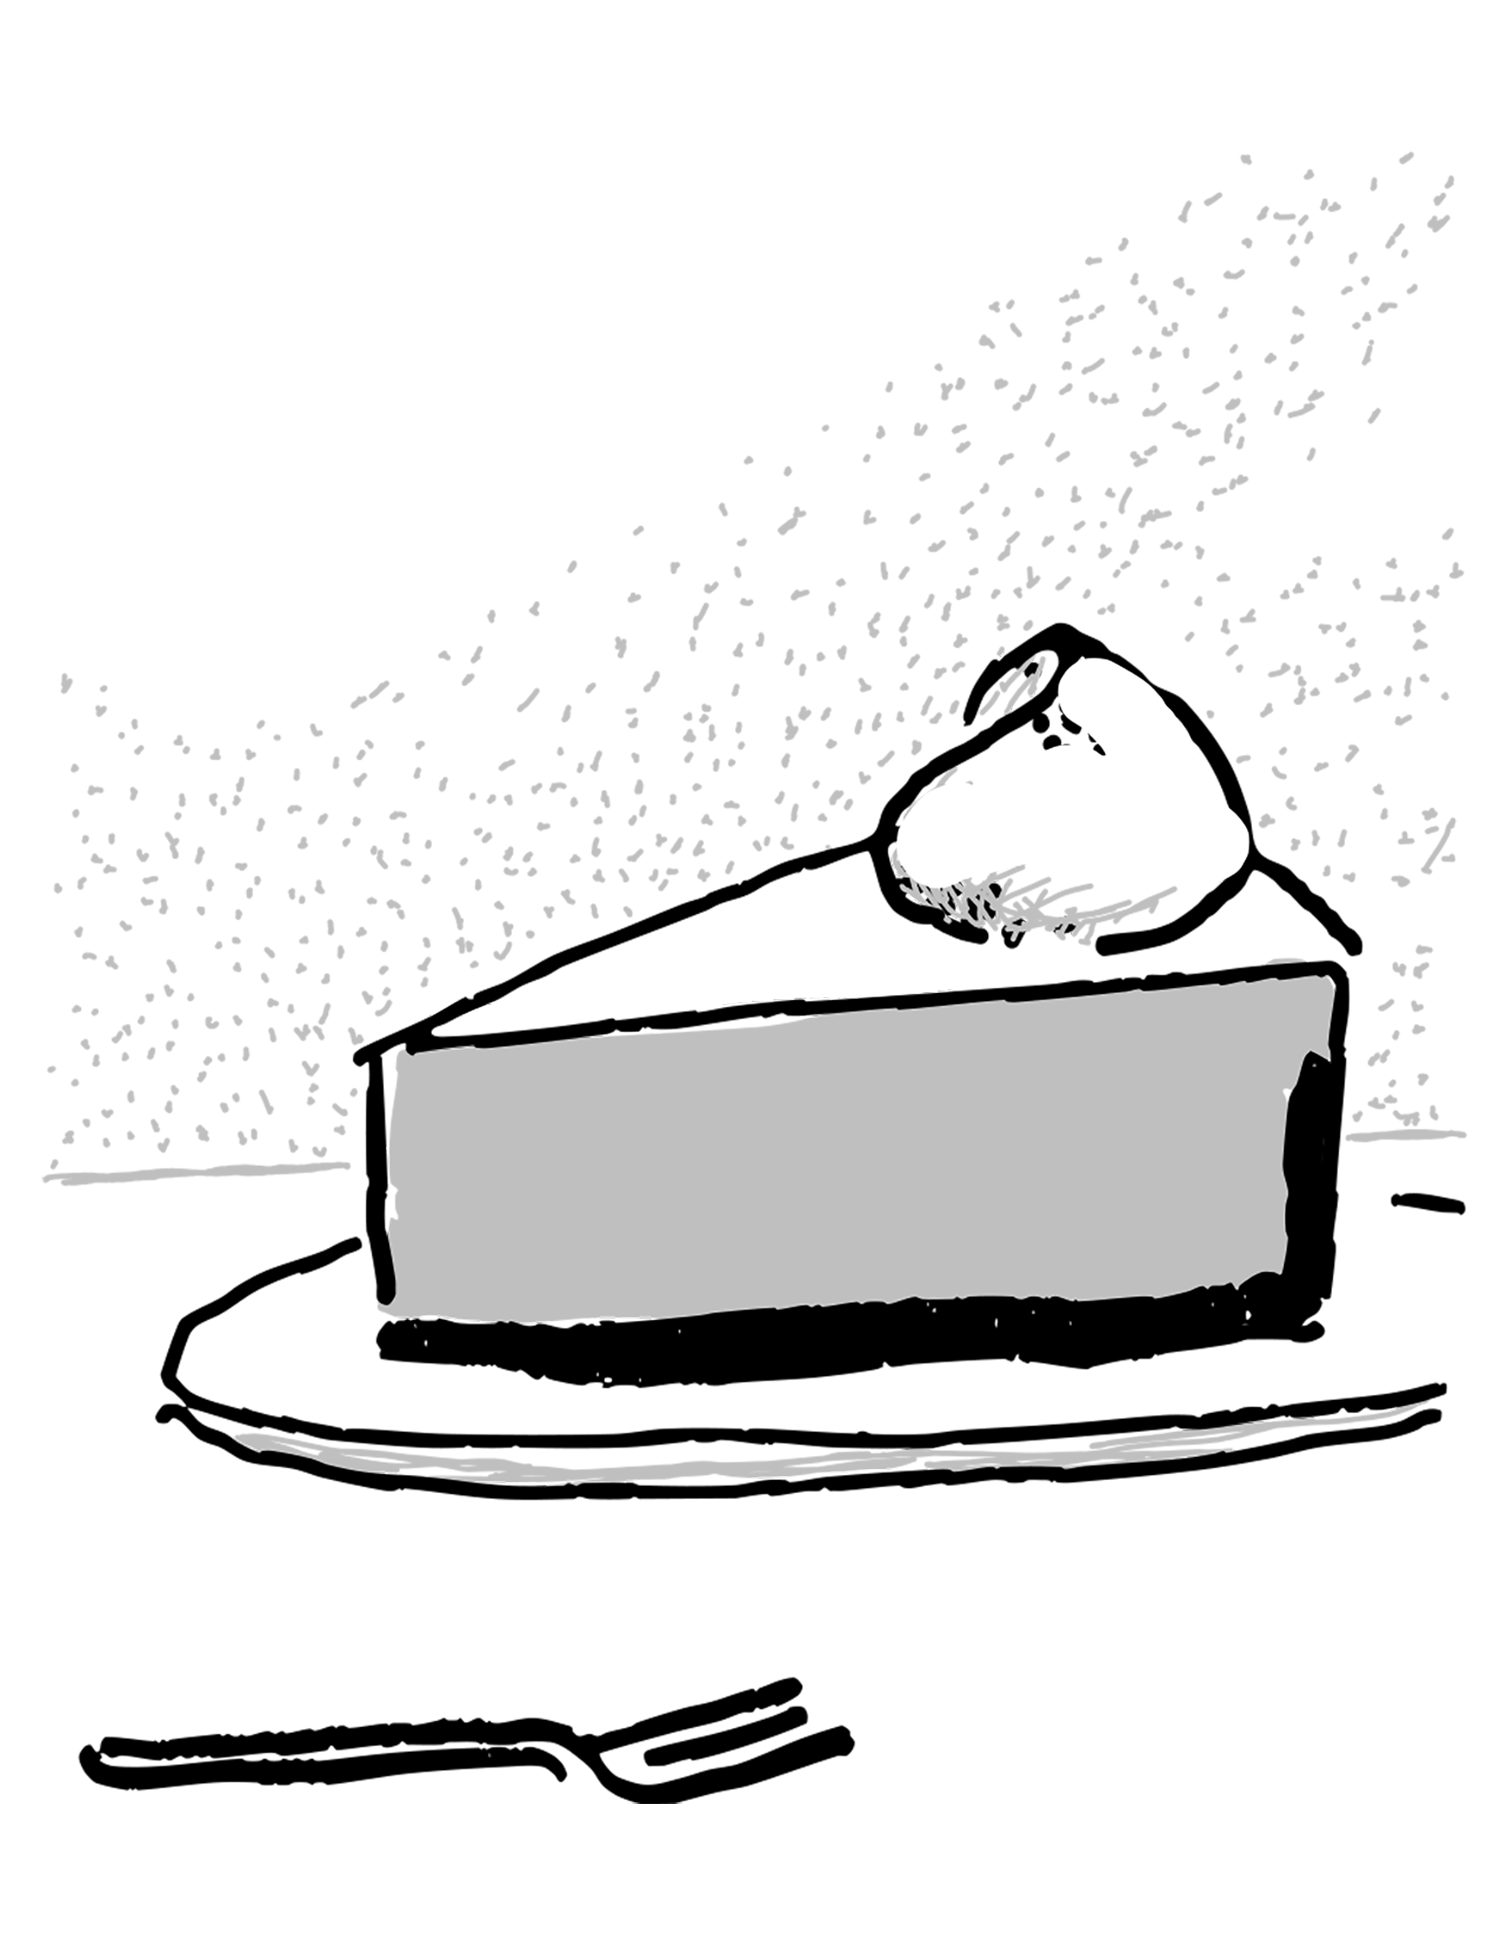 a sketch of a slice of cake